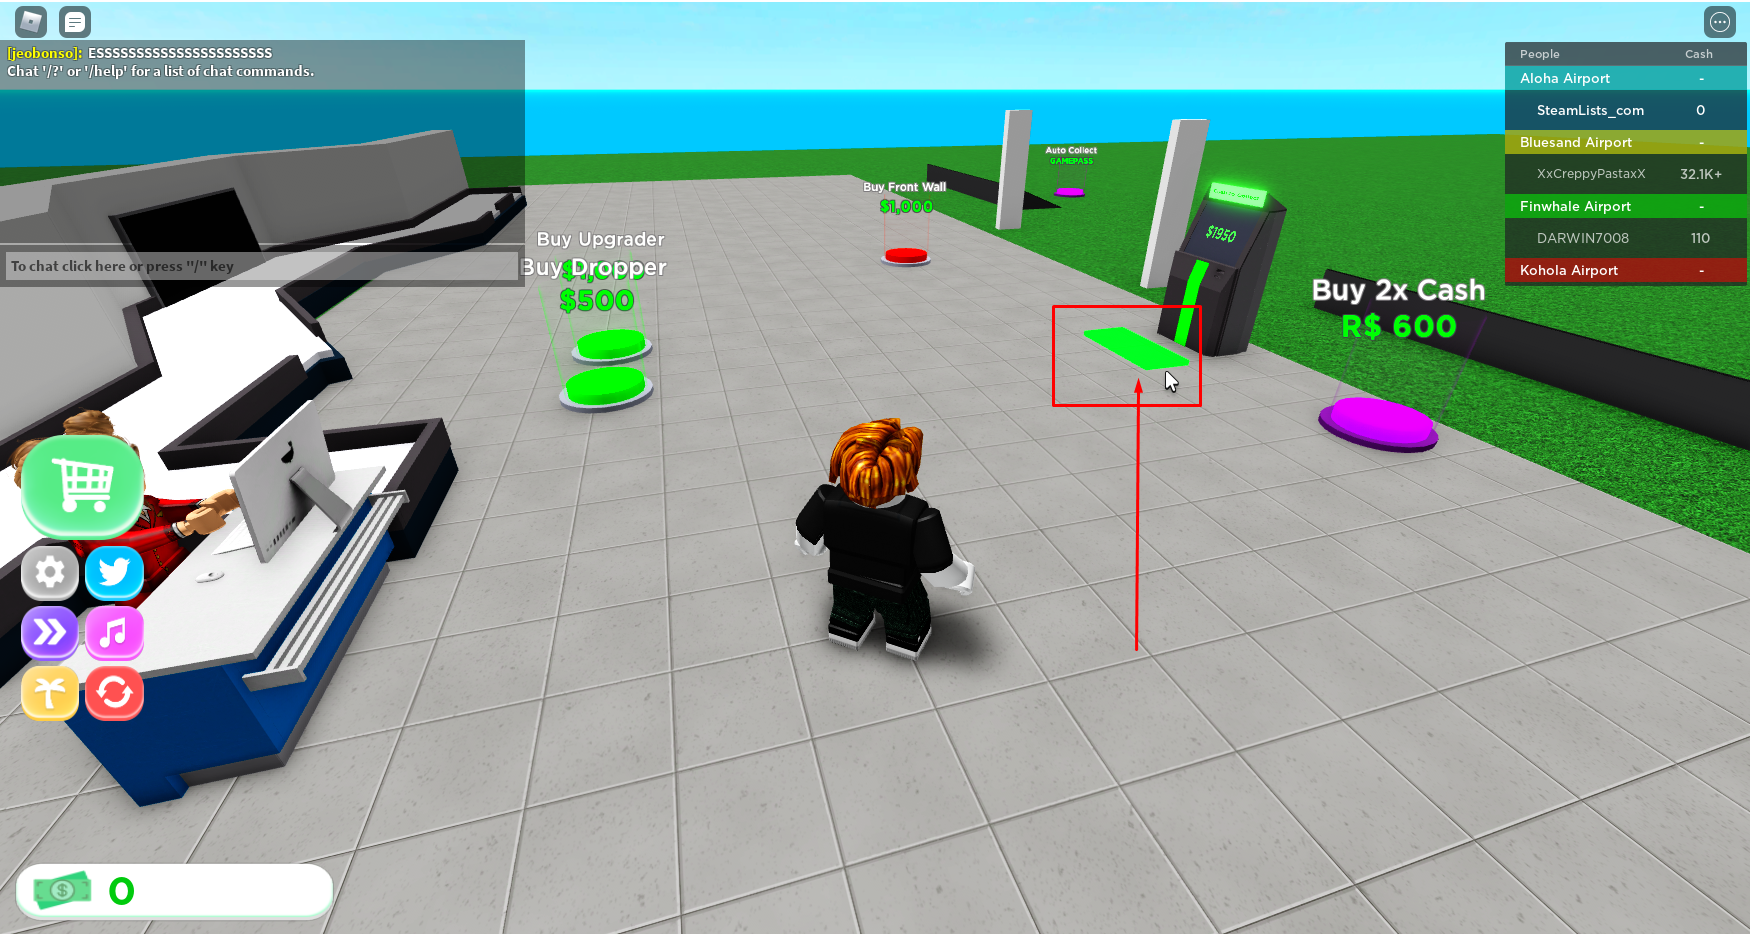 Airport Tycoon! - Roblox